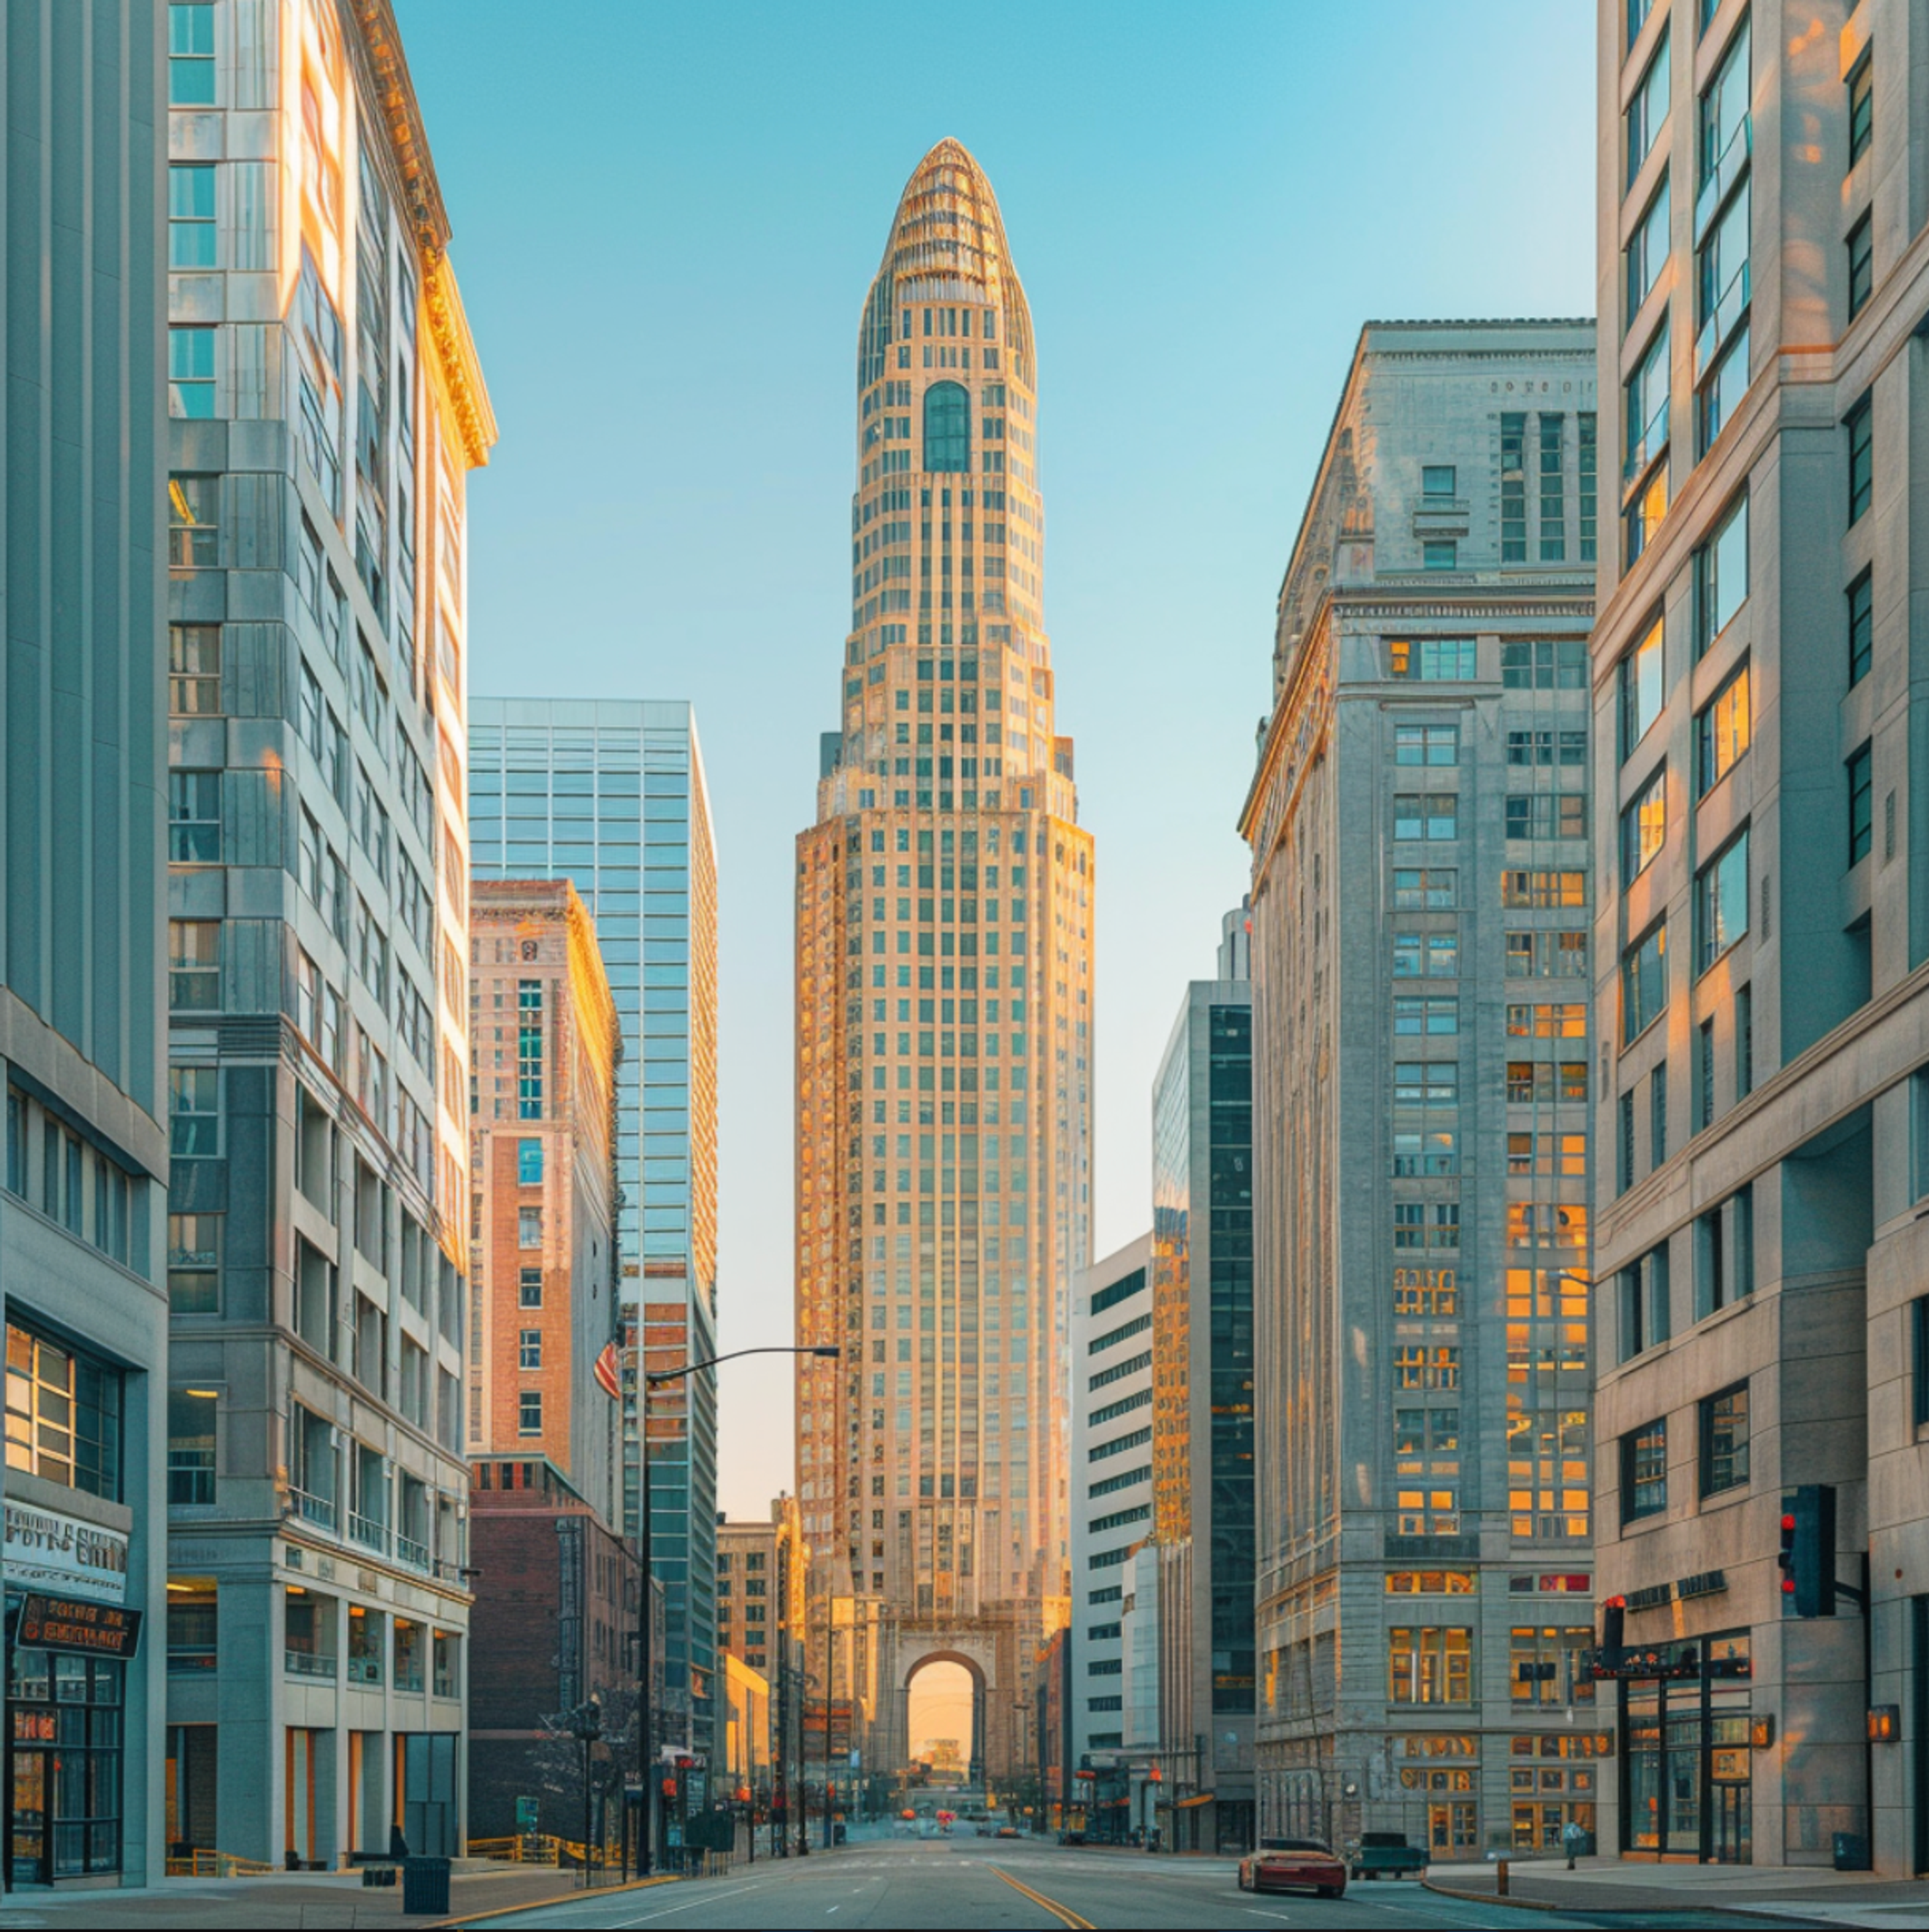 Early morning light bathes the historic architecture of Cincinnati, Ohio, with the art deco Carew Tower standing tall at the city's center, flanked by modern and classic buildings along the quiet downtown street.